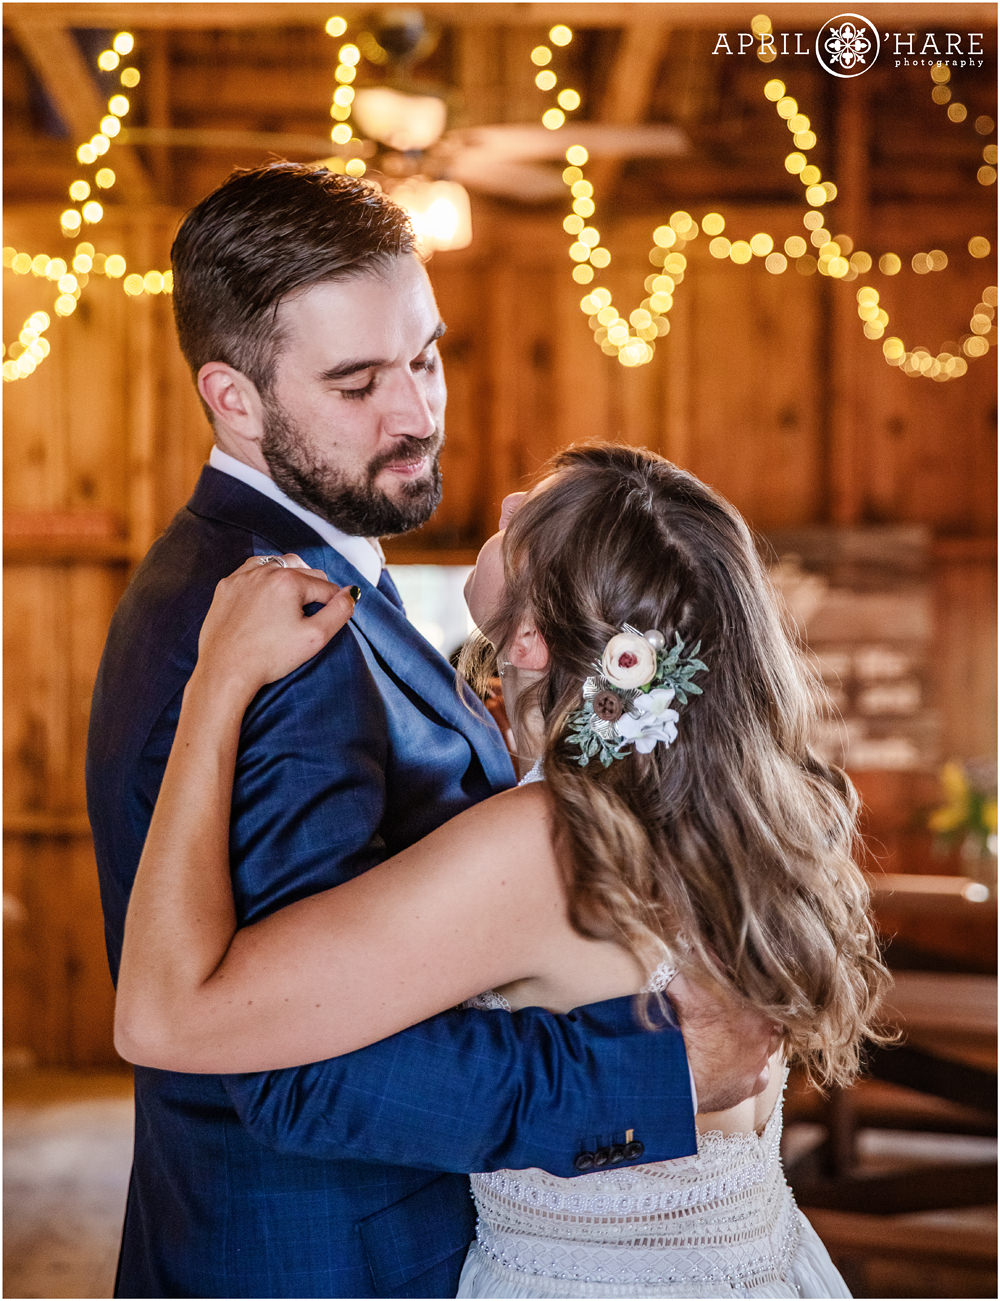 Groom looks at his bride lovingly during their first dance inside a rustic barn in Colorado